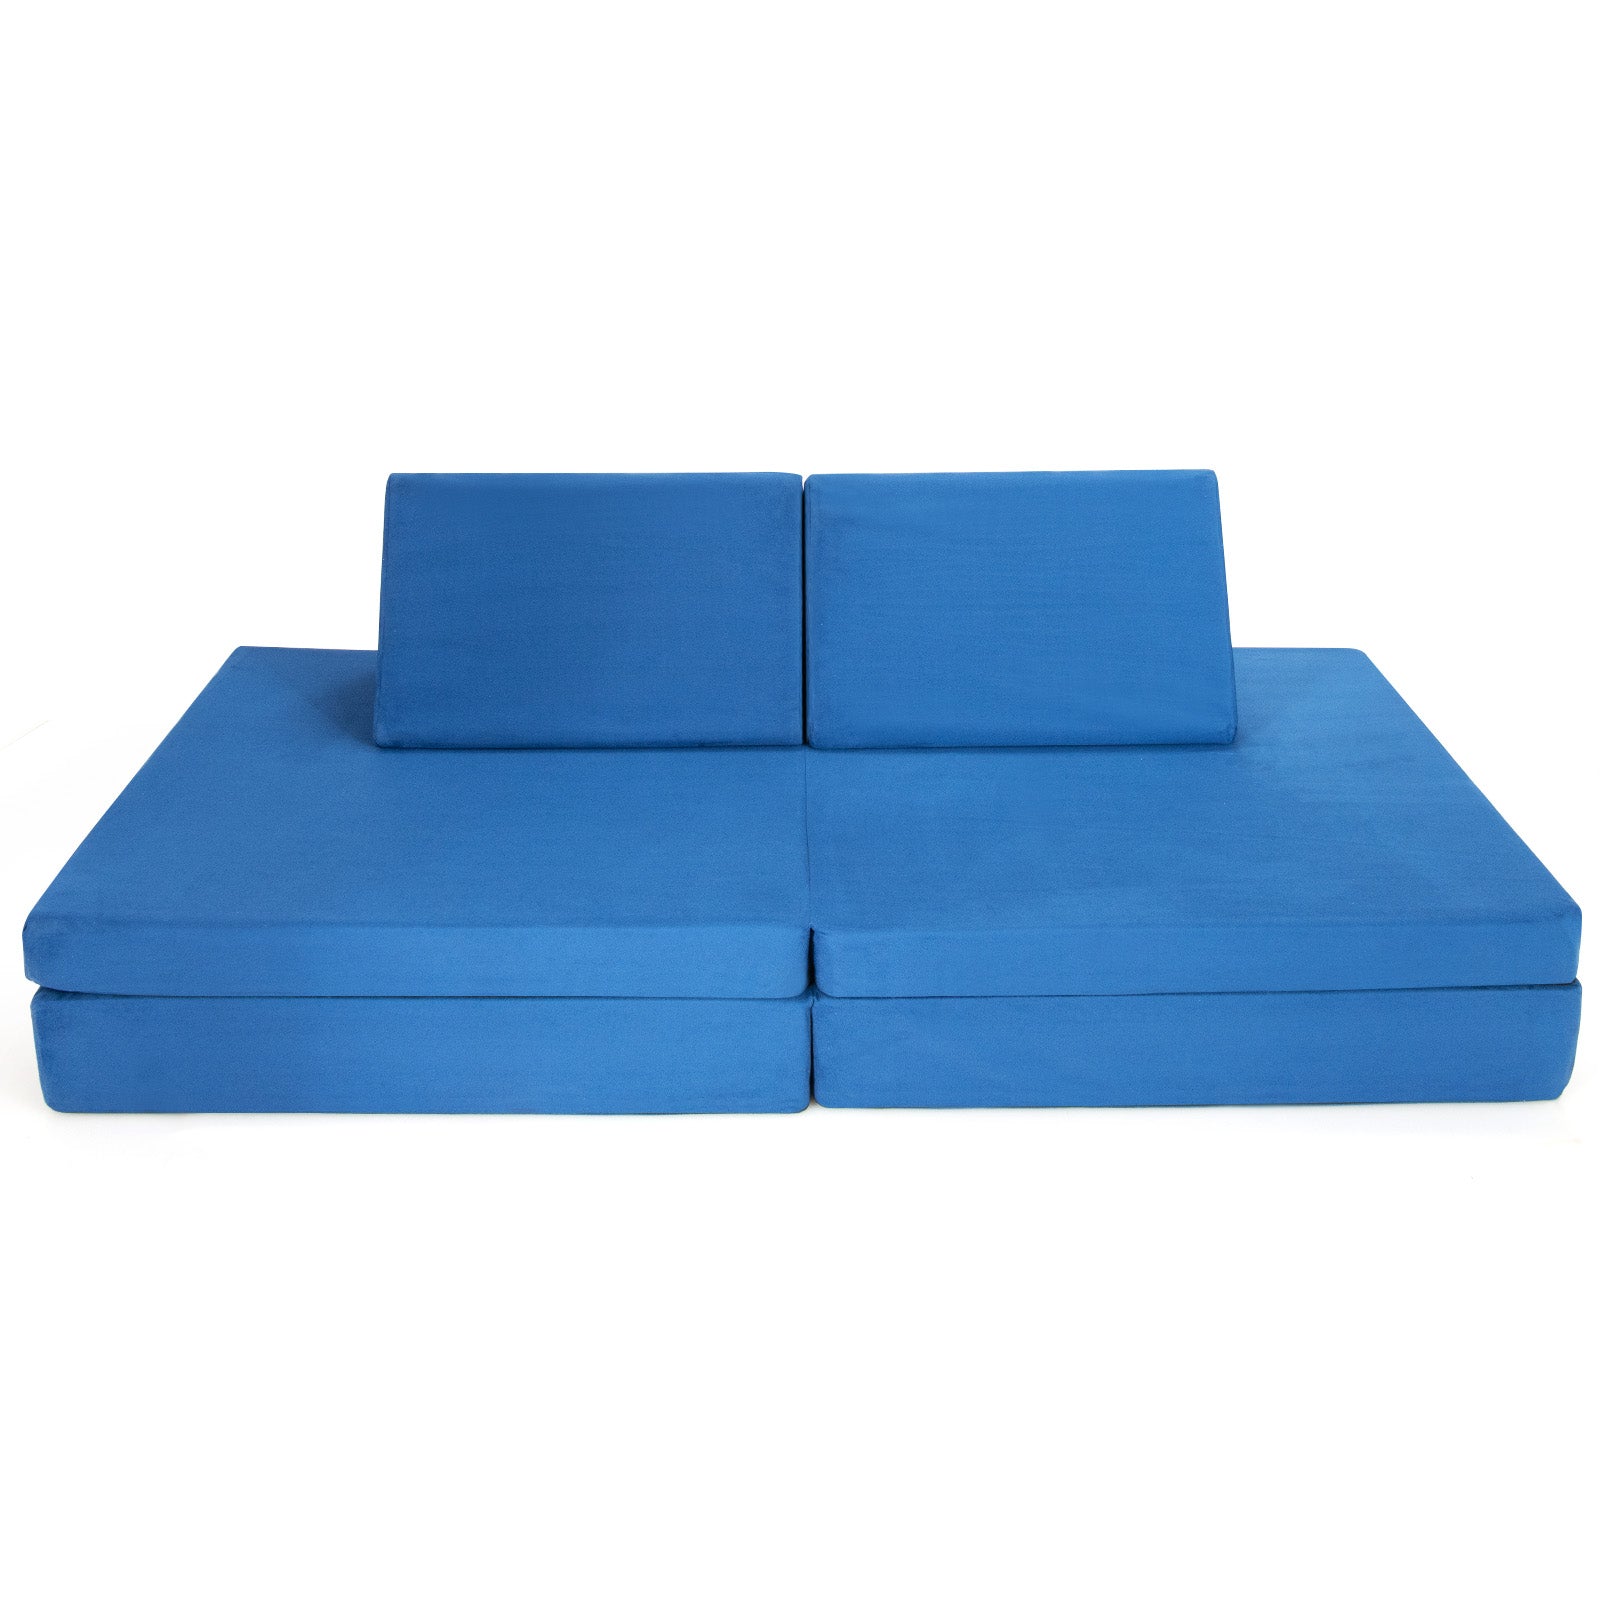 Toddler's Blue Couch Set with 2 Foldable Mats - 4-Piece Convertible Design